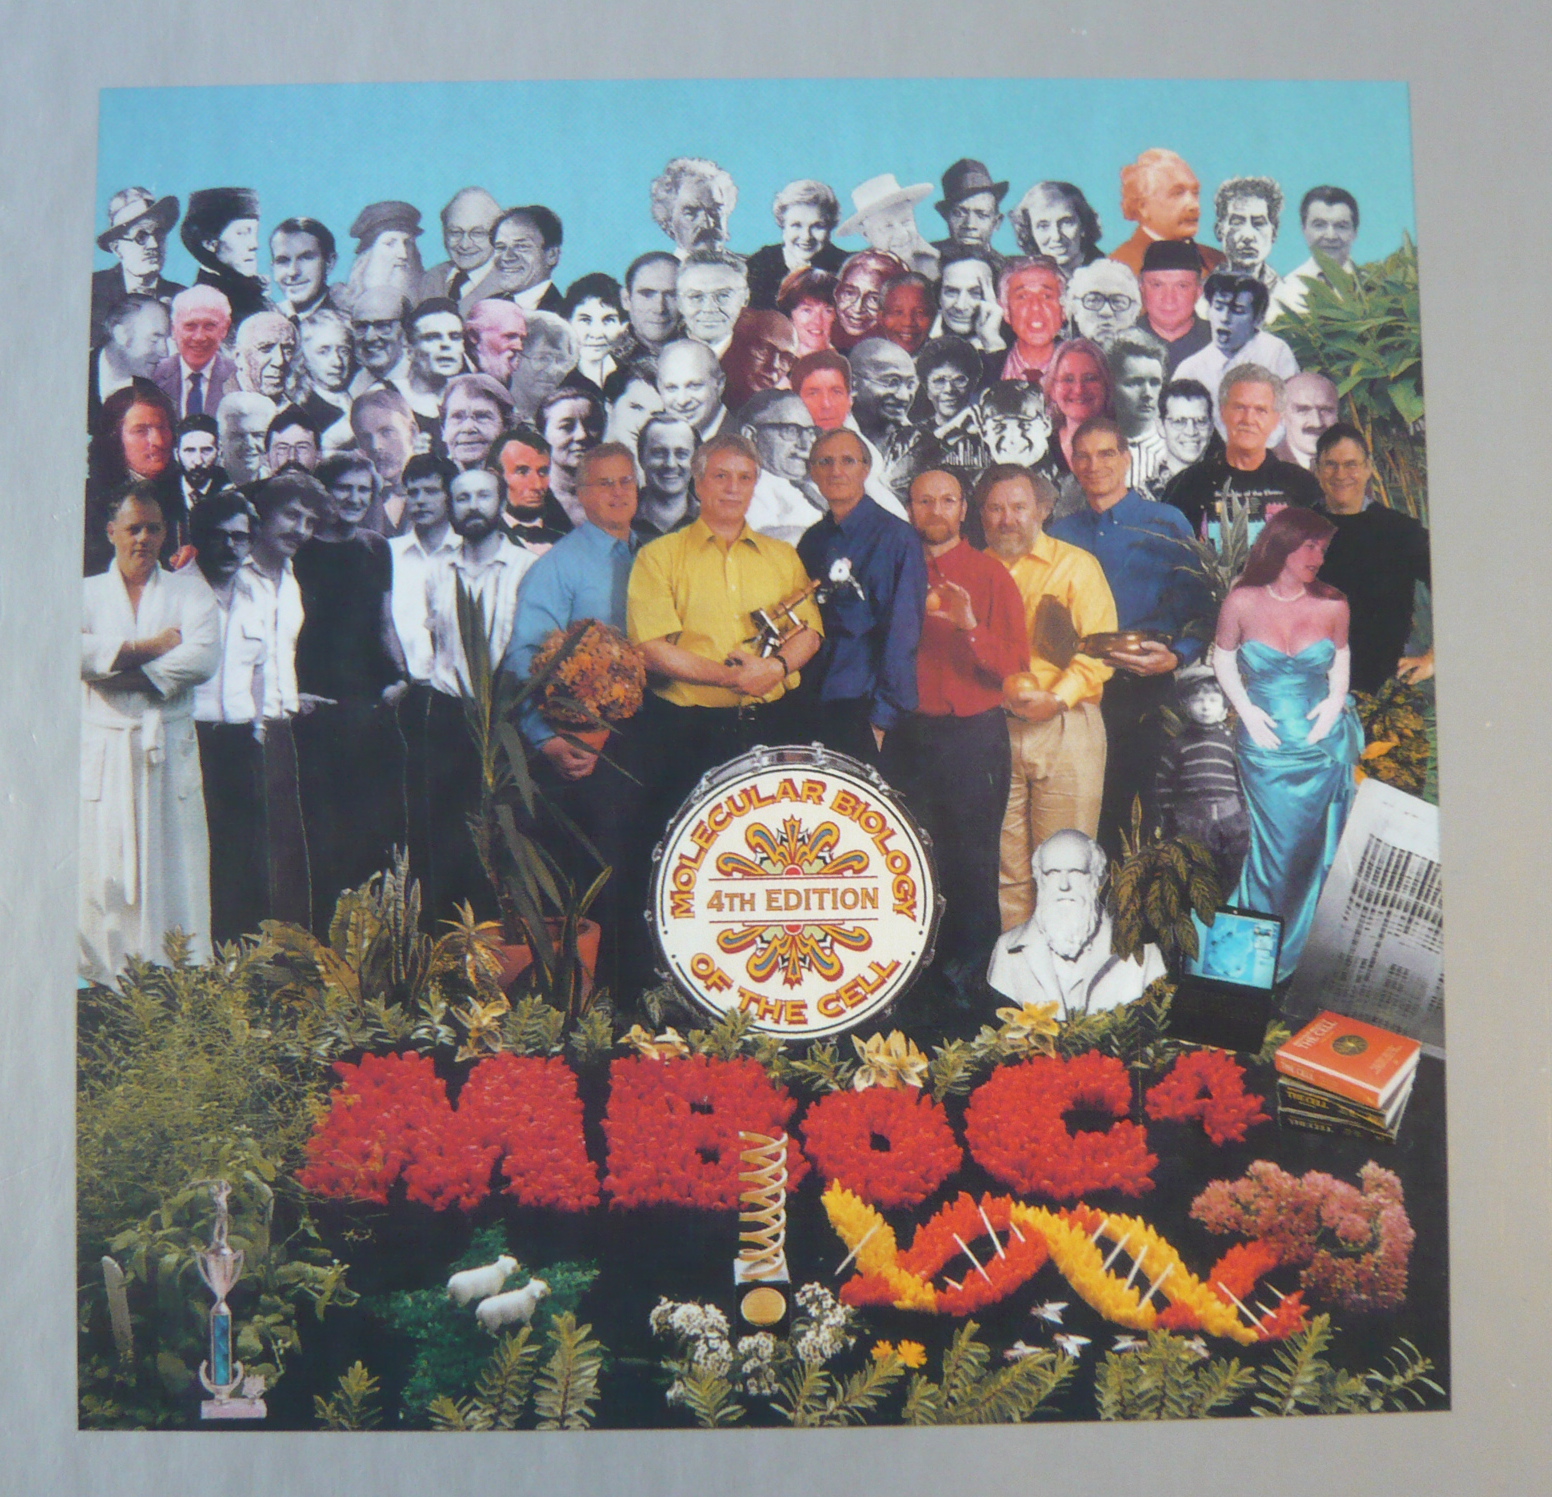 A reimagining of the Sgt Pepper's Lonely Hearts Club Band Cover.